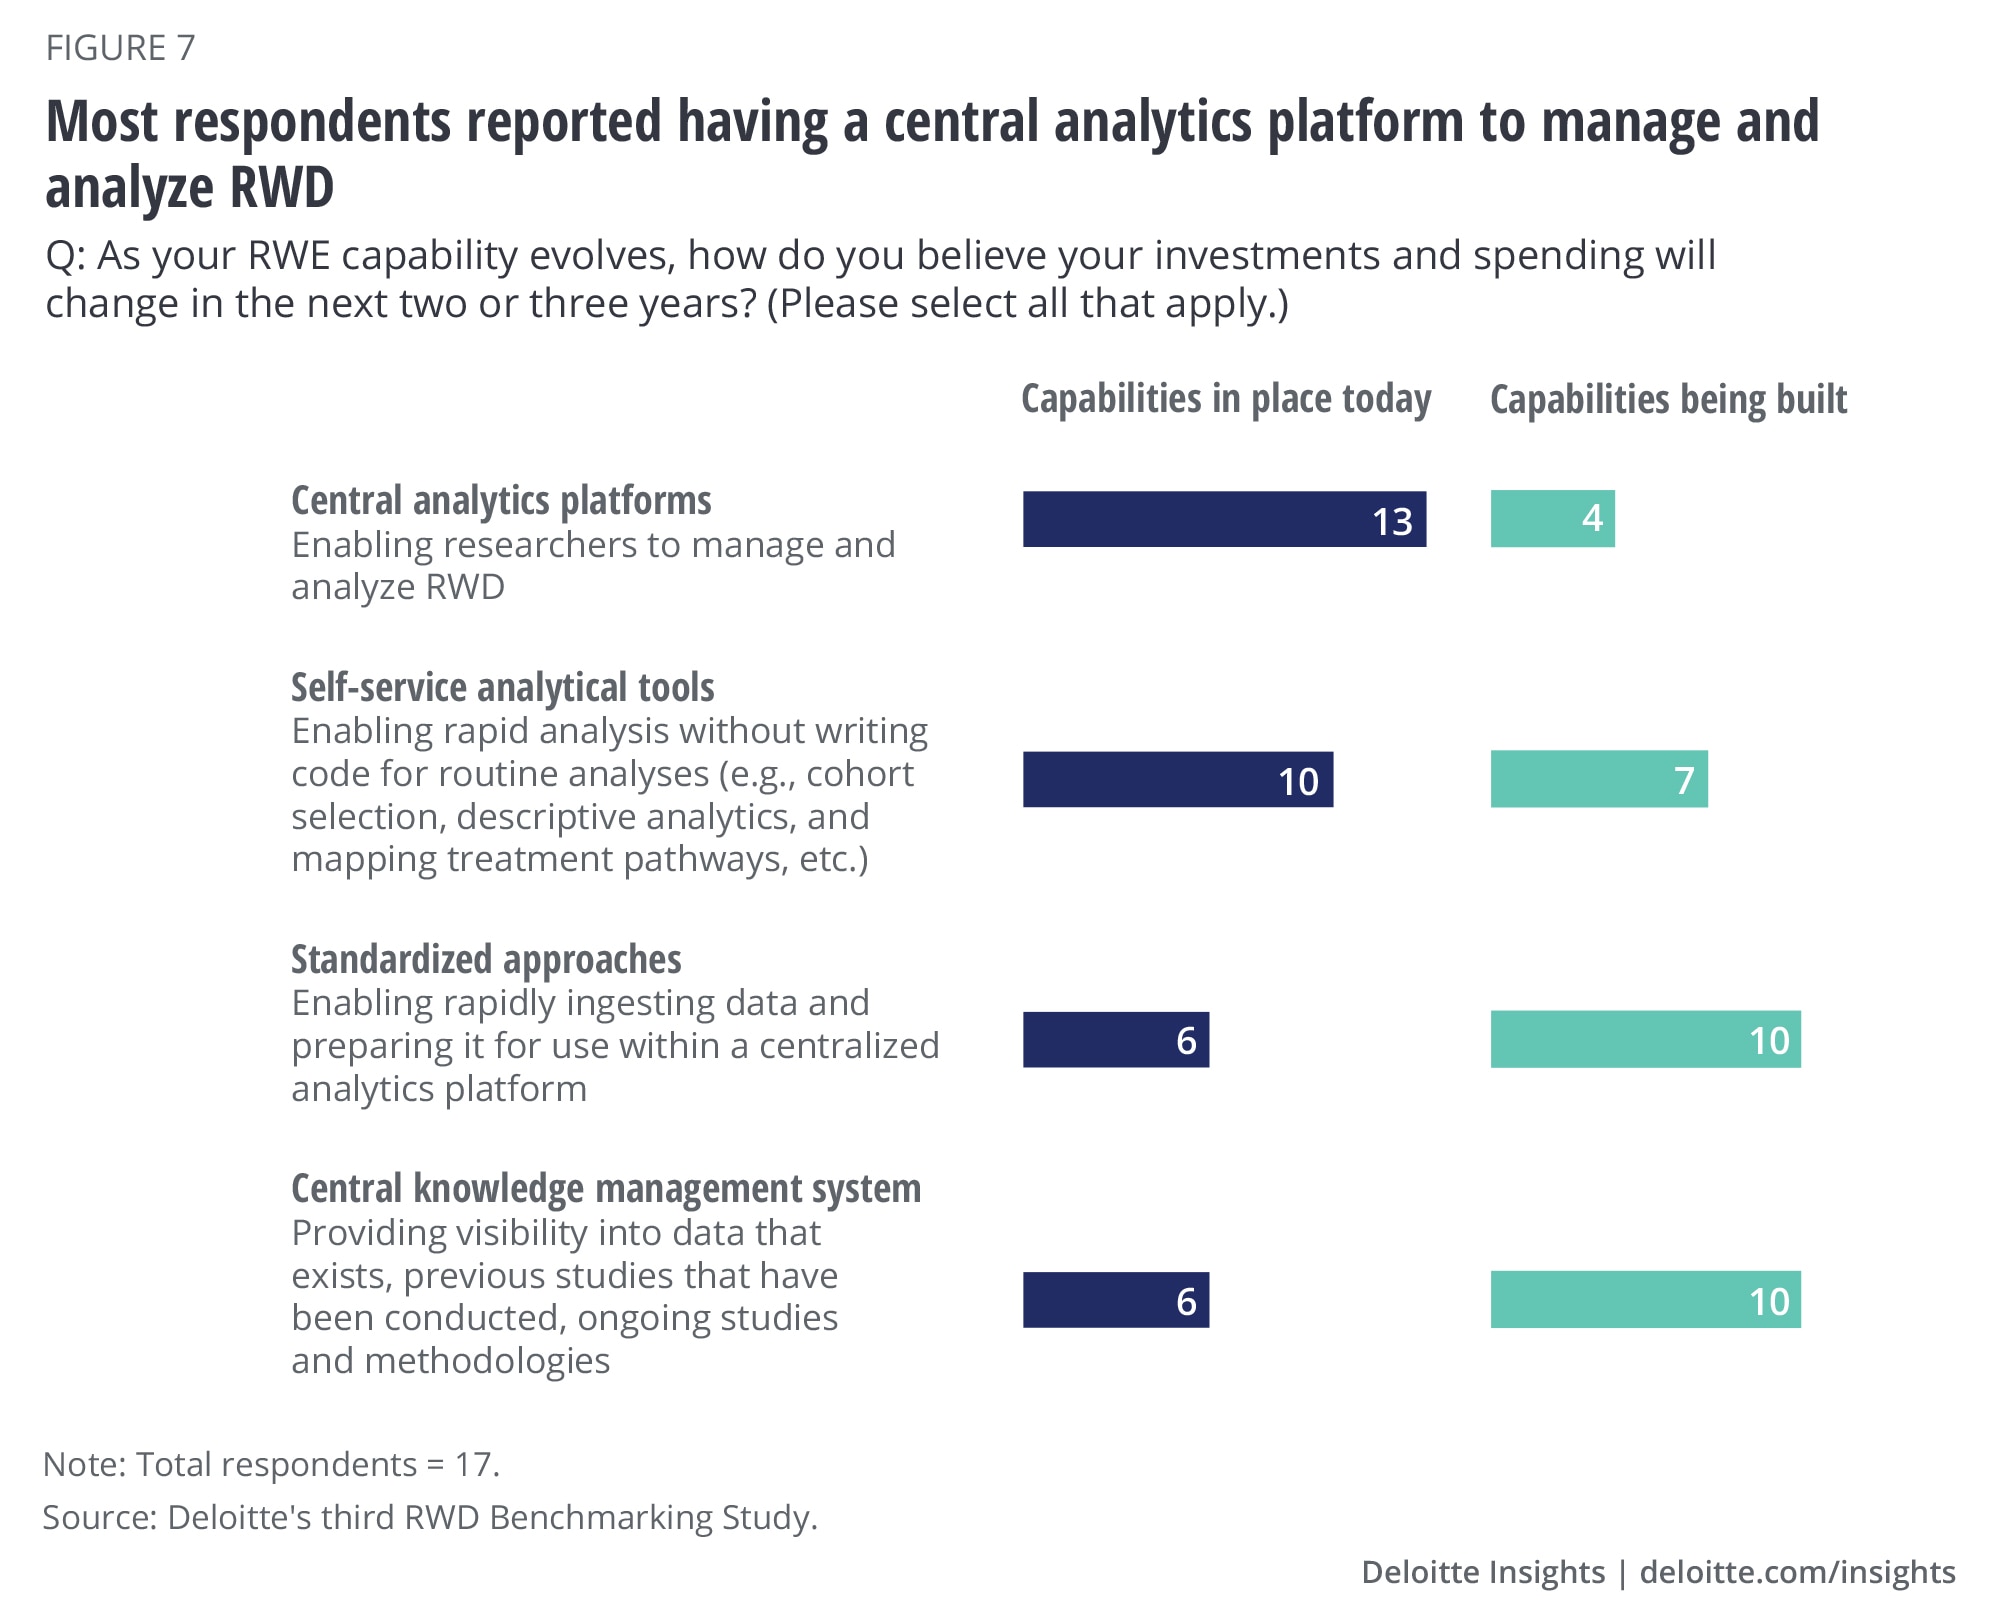 Most respondents reported having a central analytics platform to manage and analyze RWD